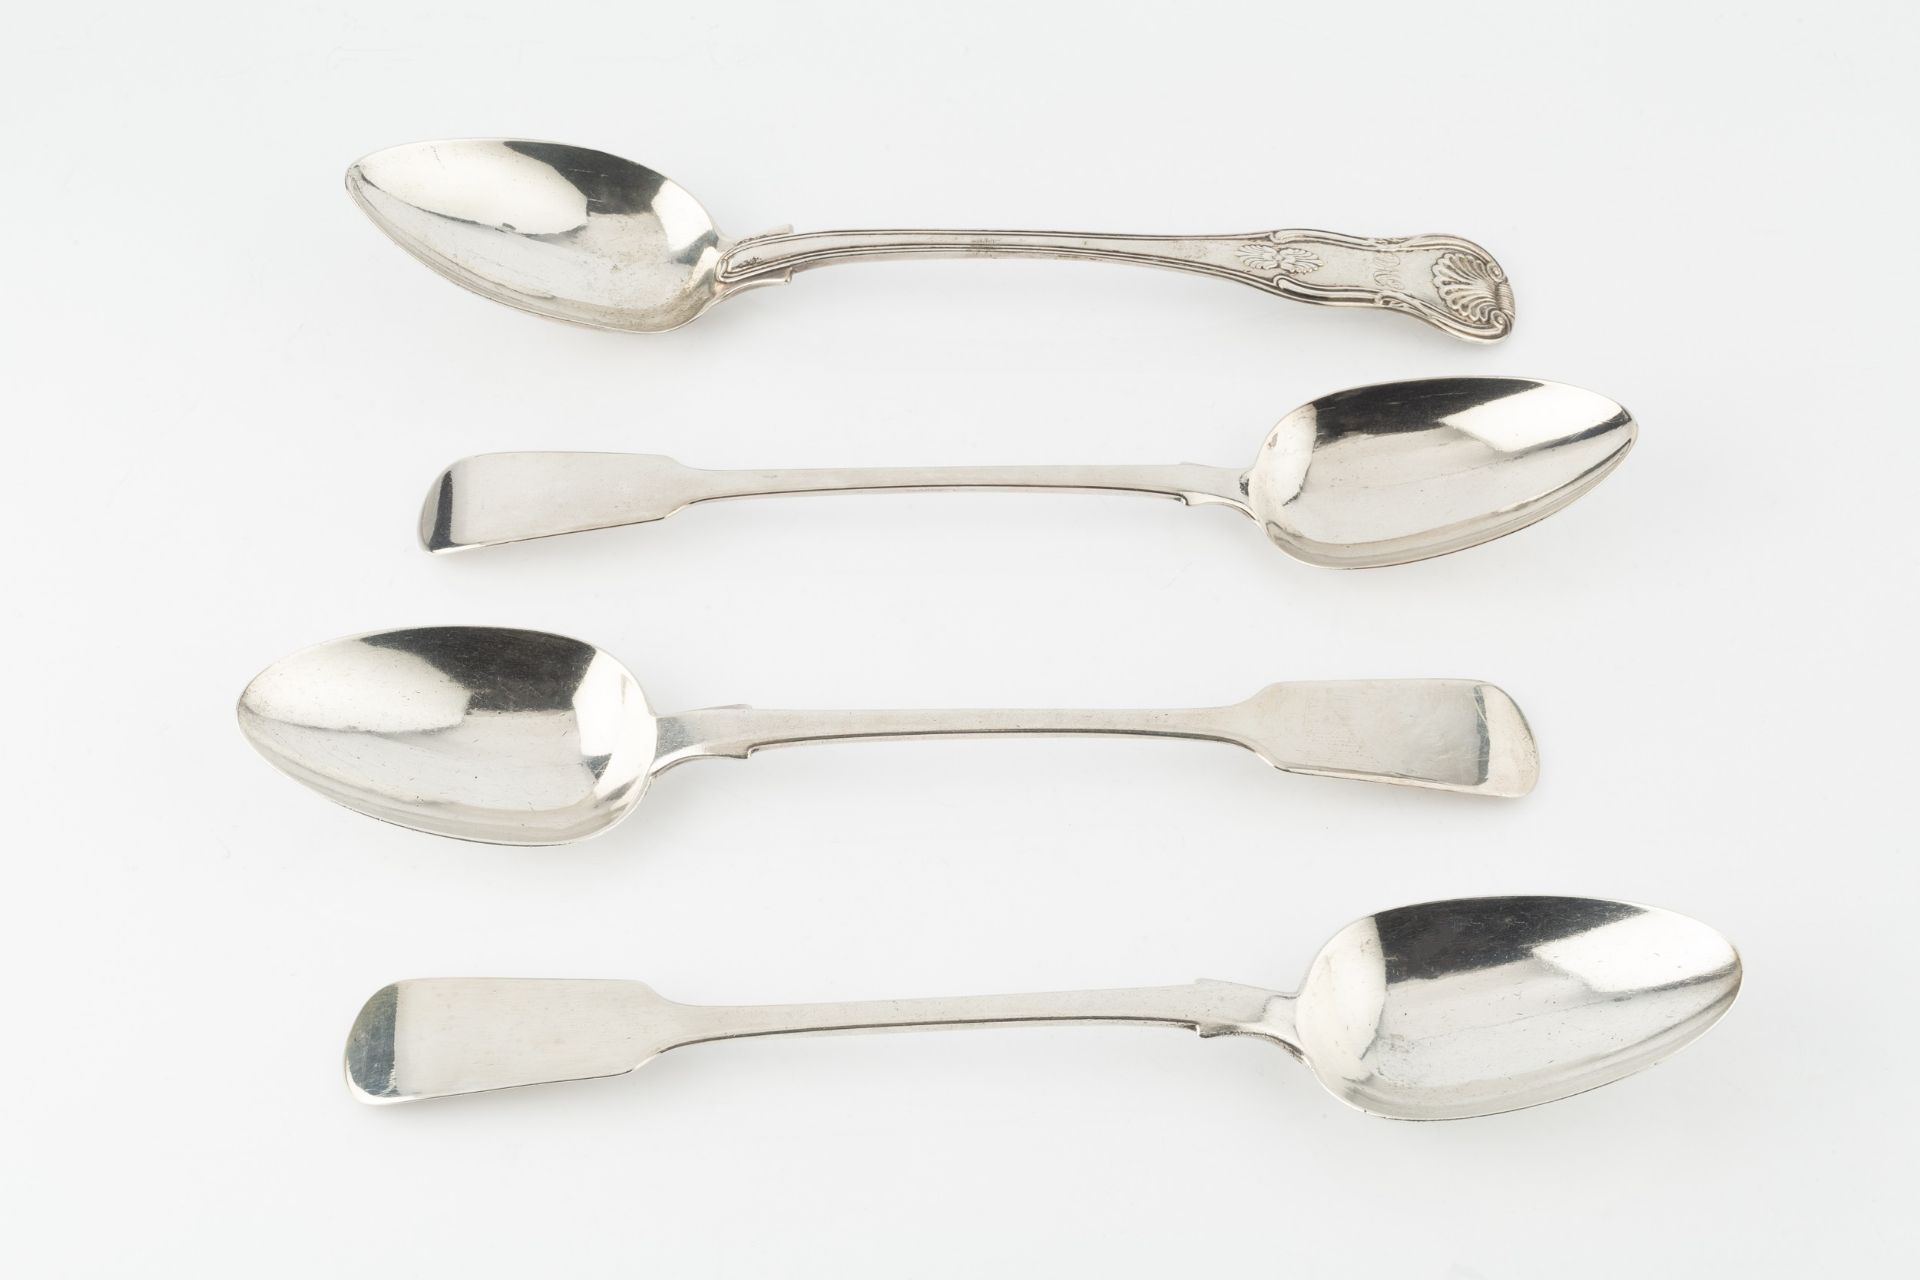 A George IV silver King's pattern gravy spoon, by William Troby, Londonn 1822, a pair of William